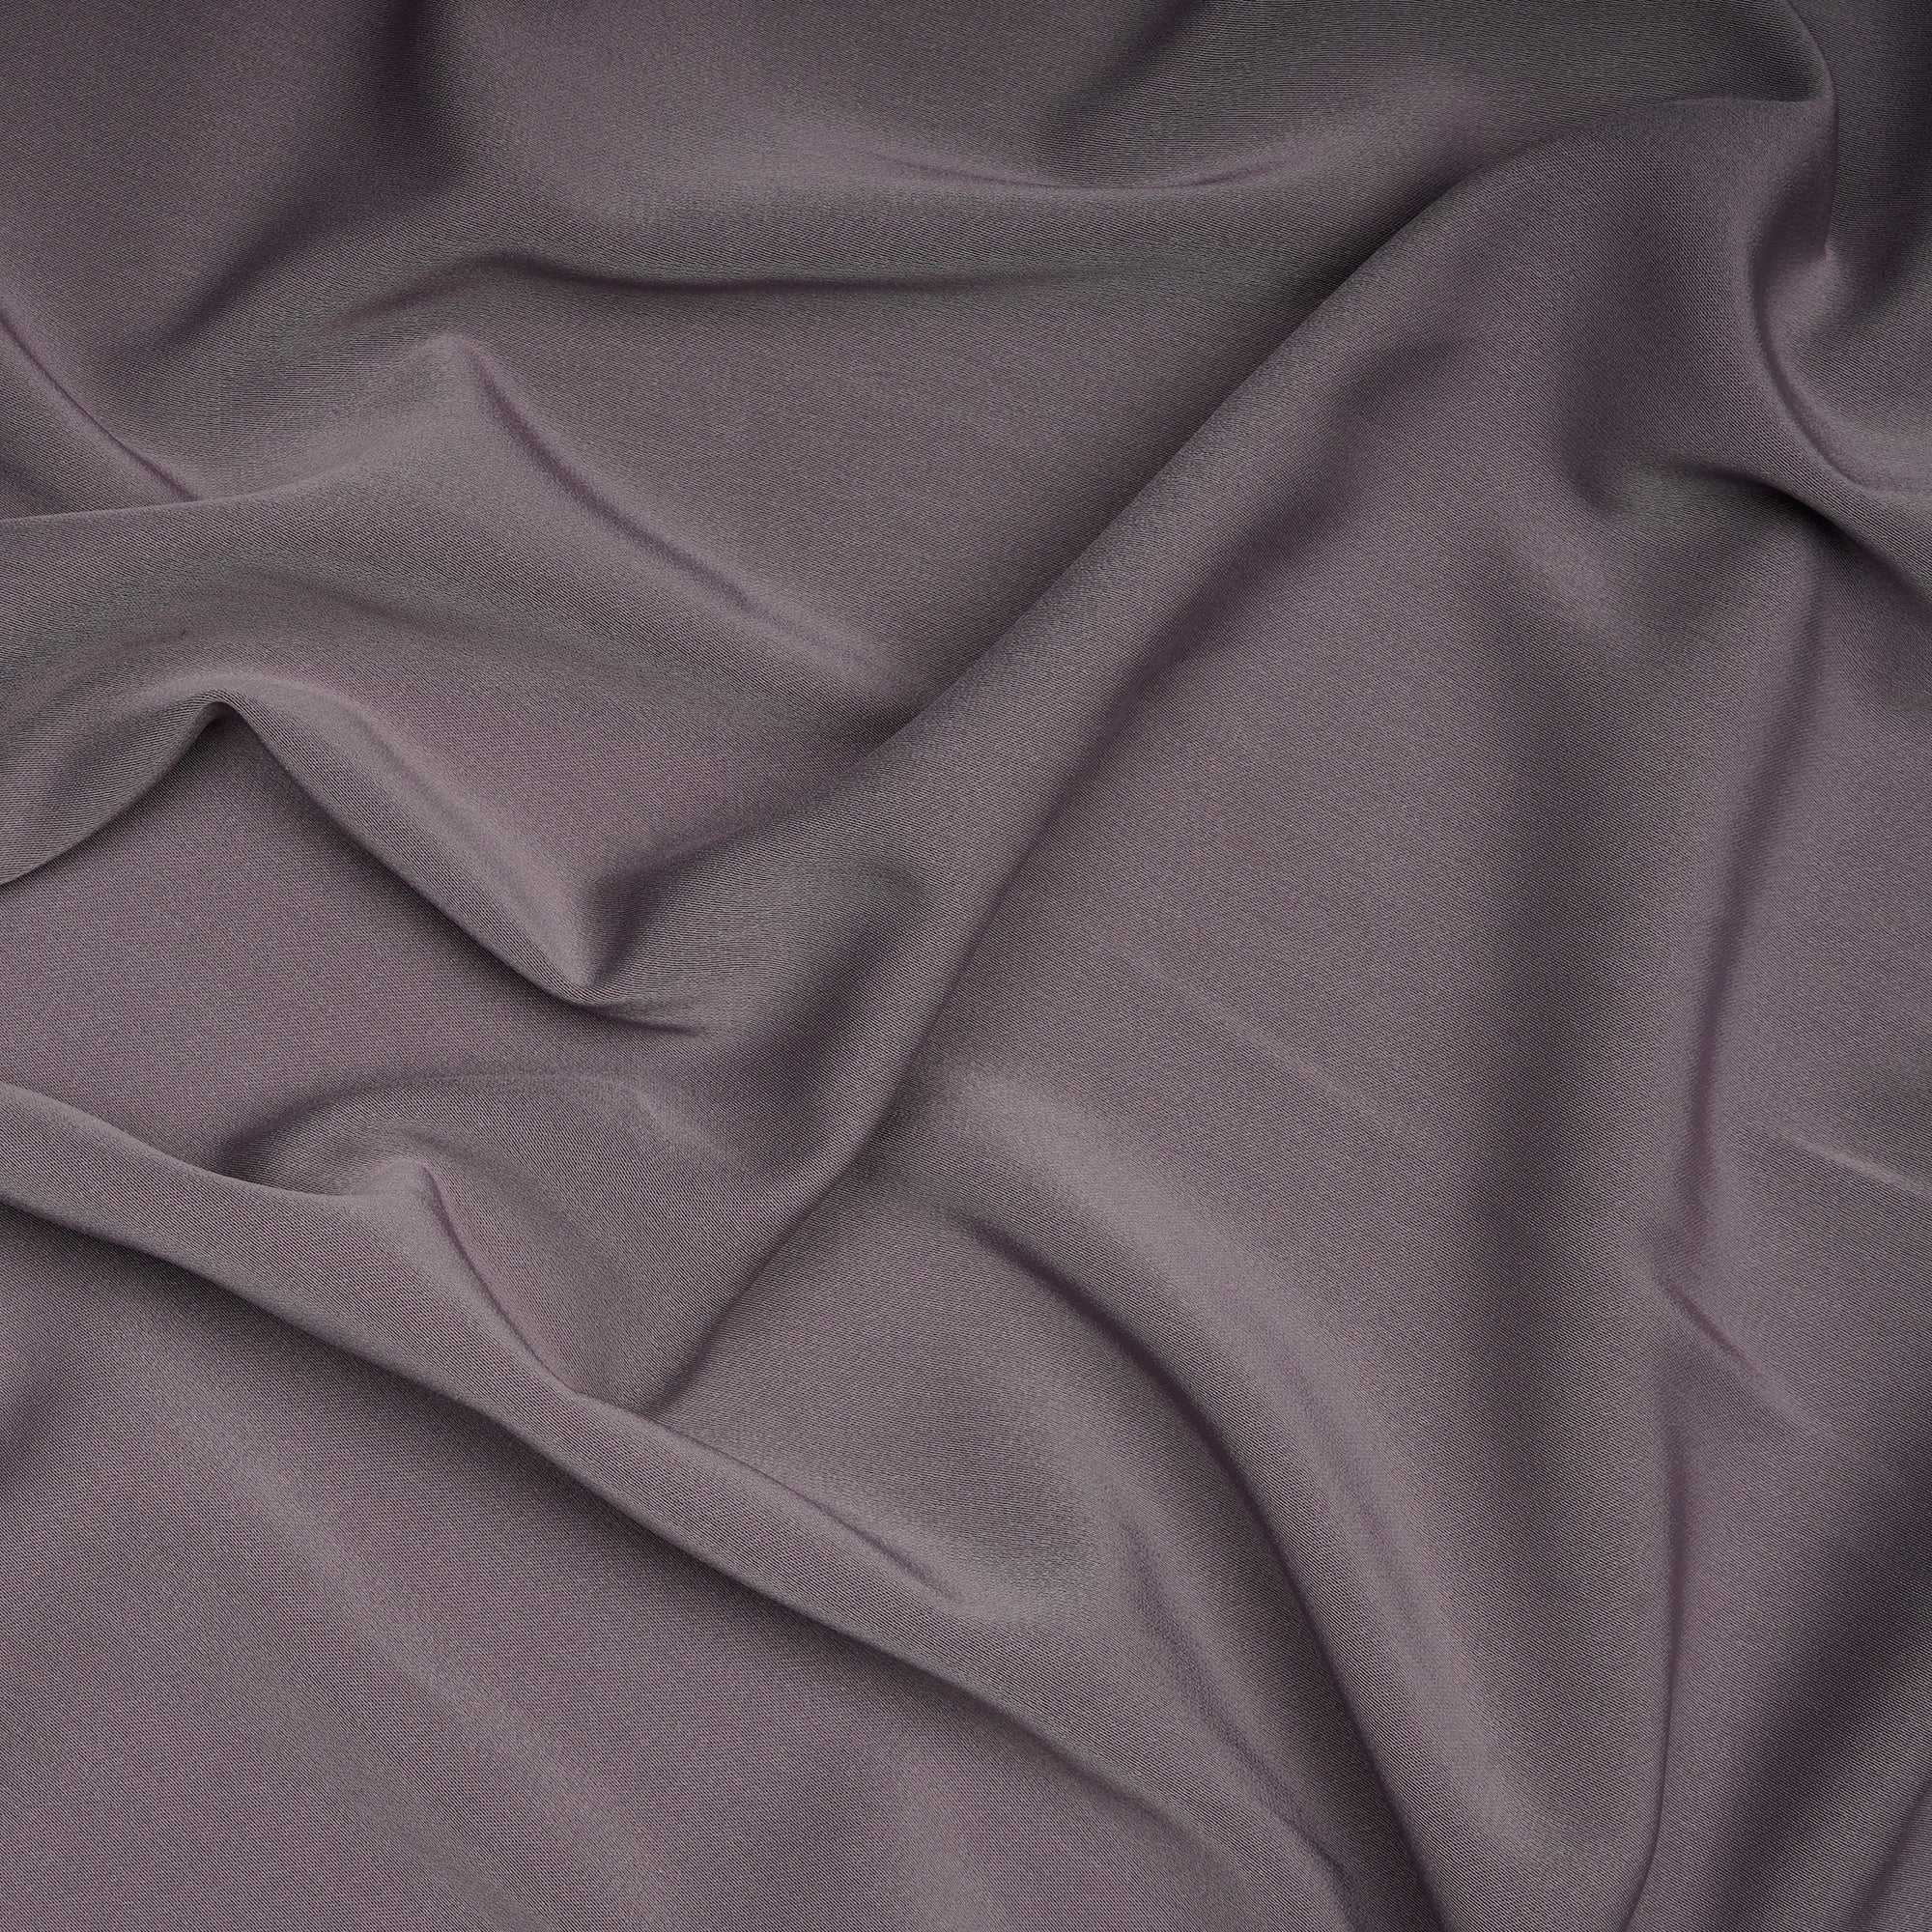 Purple Dove Solid Dyed Imported Prada Crepe Fabric (60" Width)